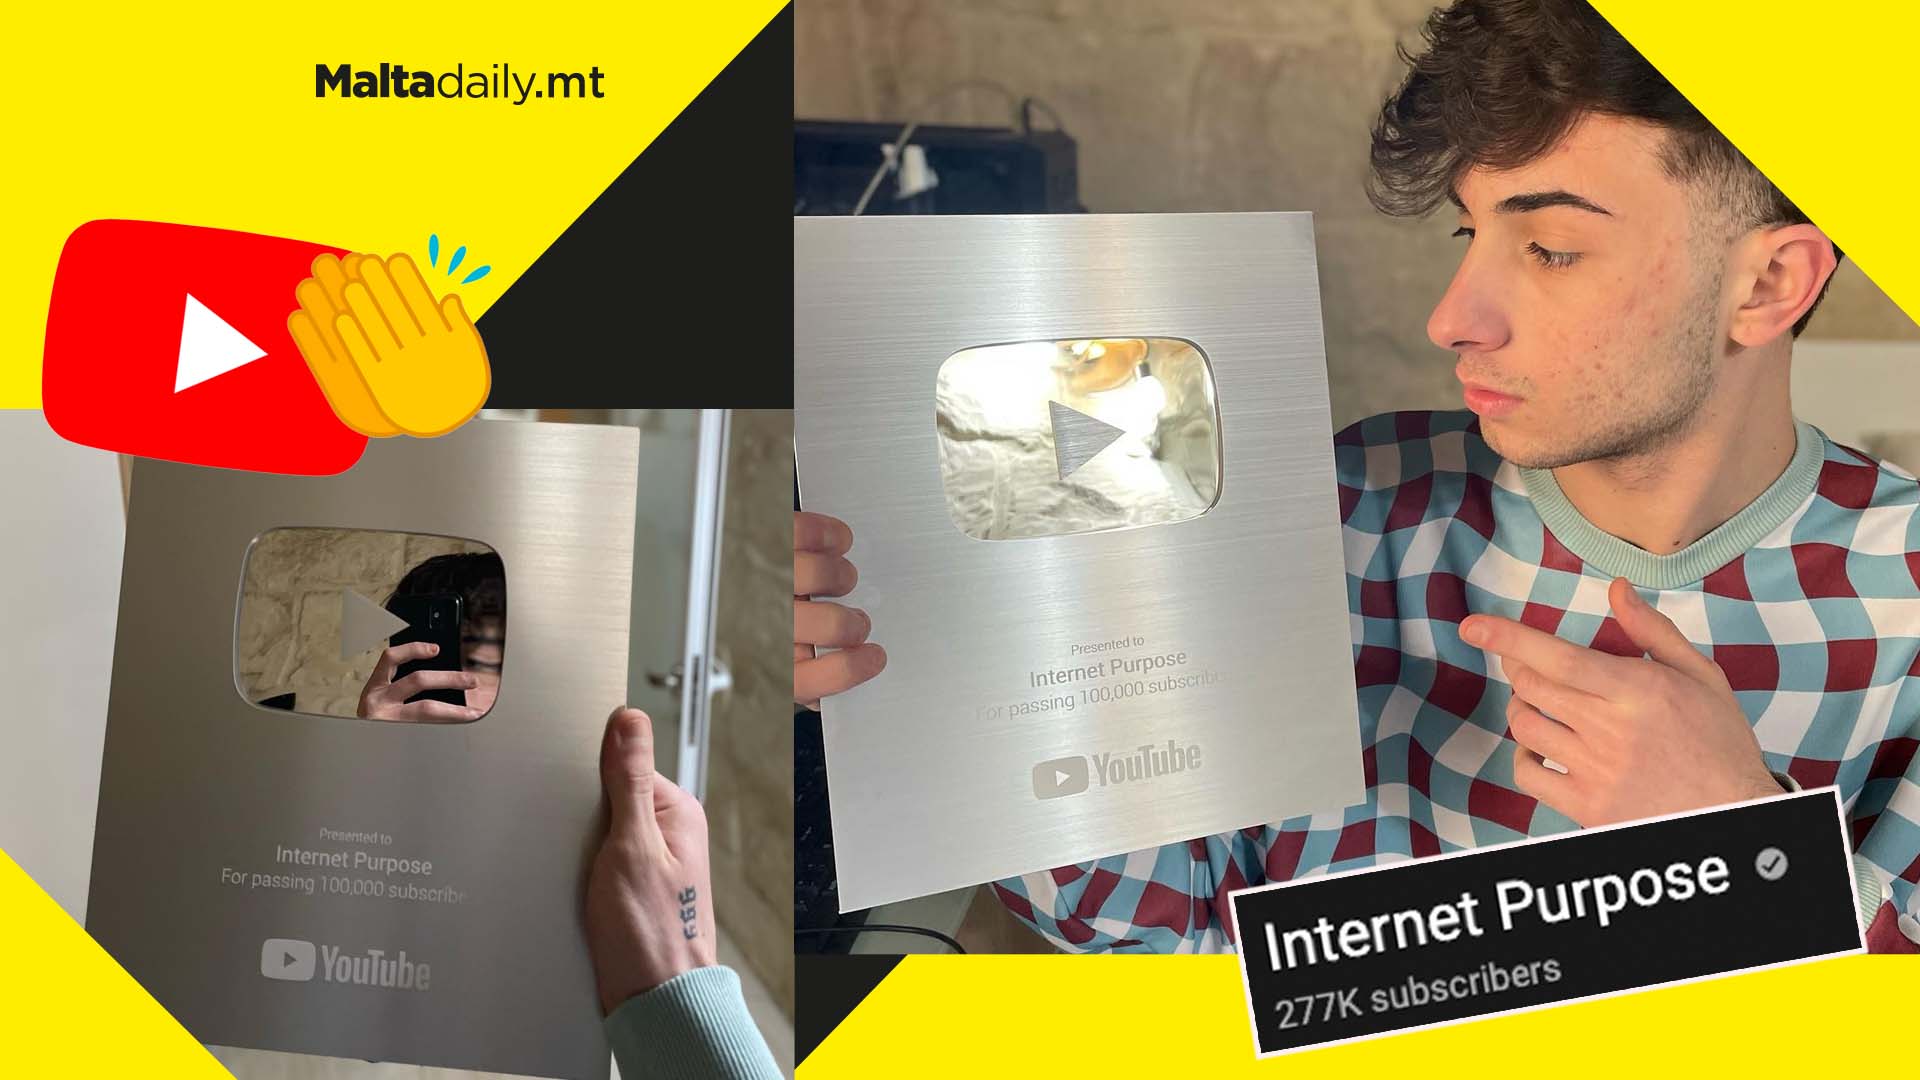 Local YouTuber Gabriel Tonna awarded his 100K subscriber plaque